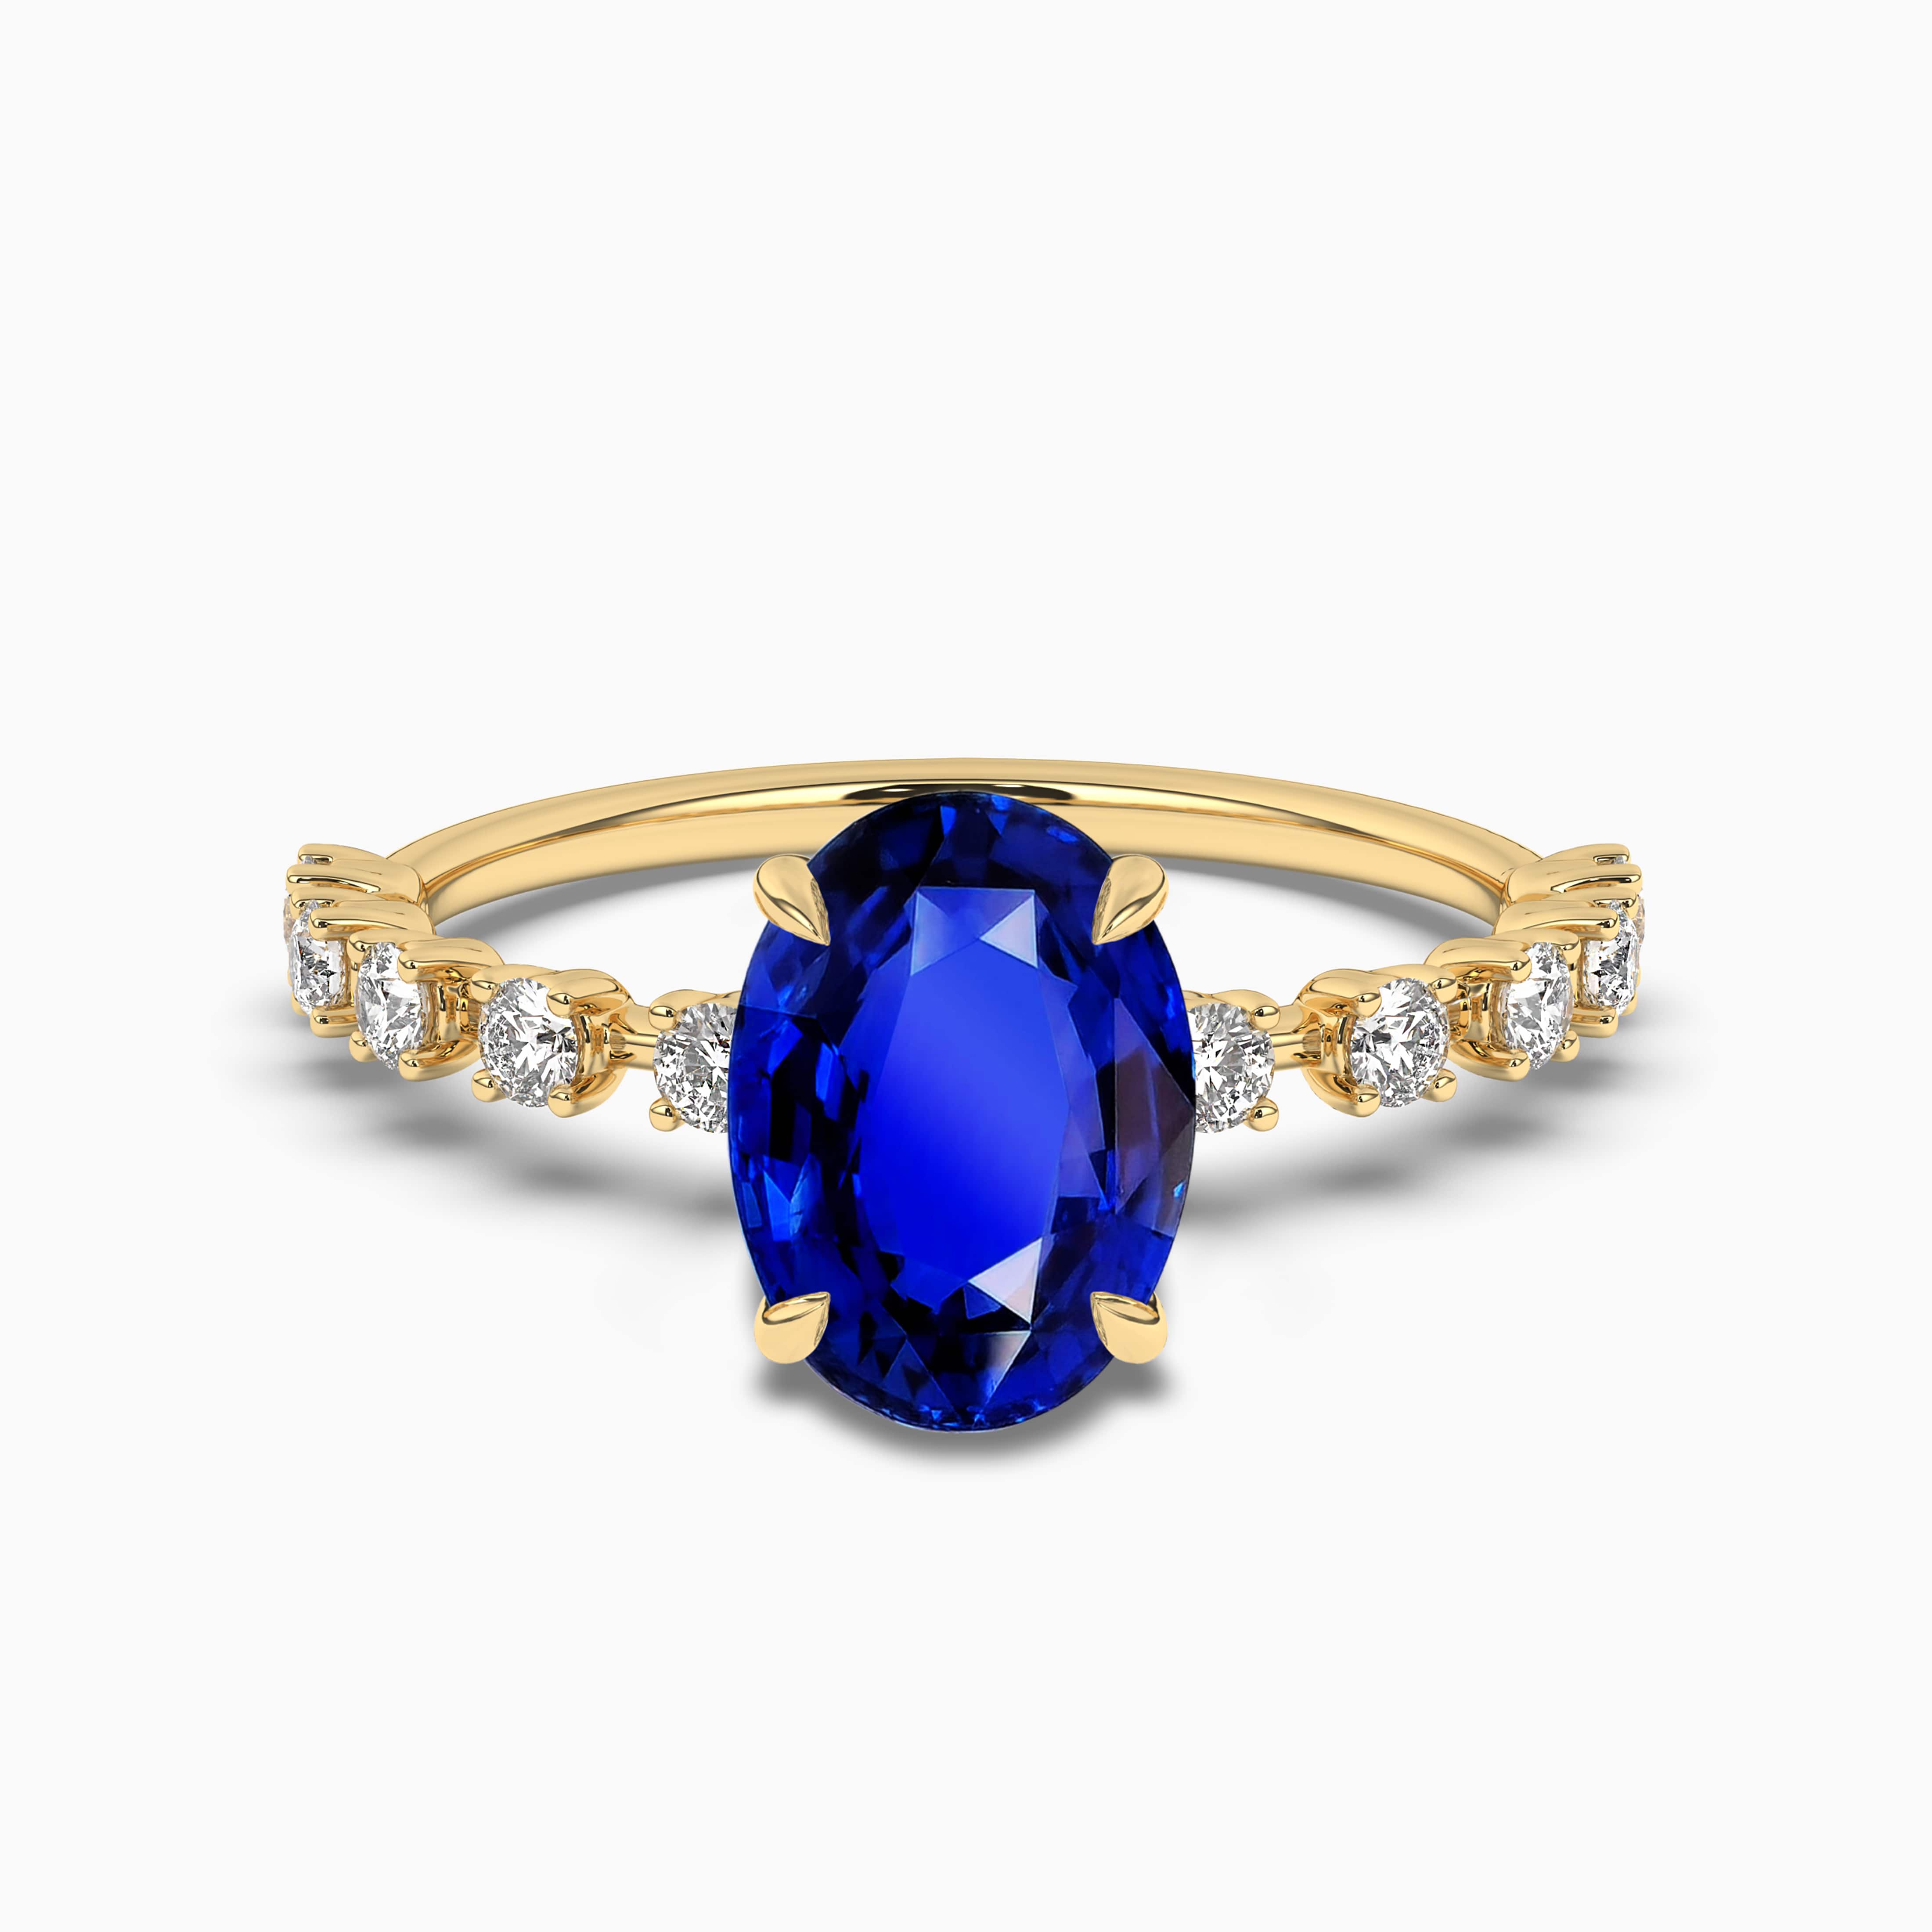 BLUE OVAL SAPPHIRE TRILOGY ENGAGEMENT RING YELLOW GOLD